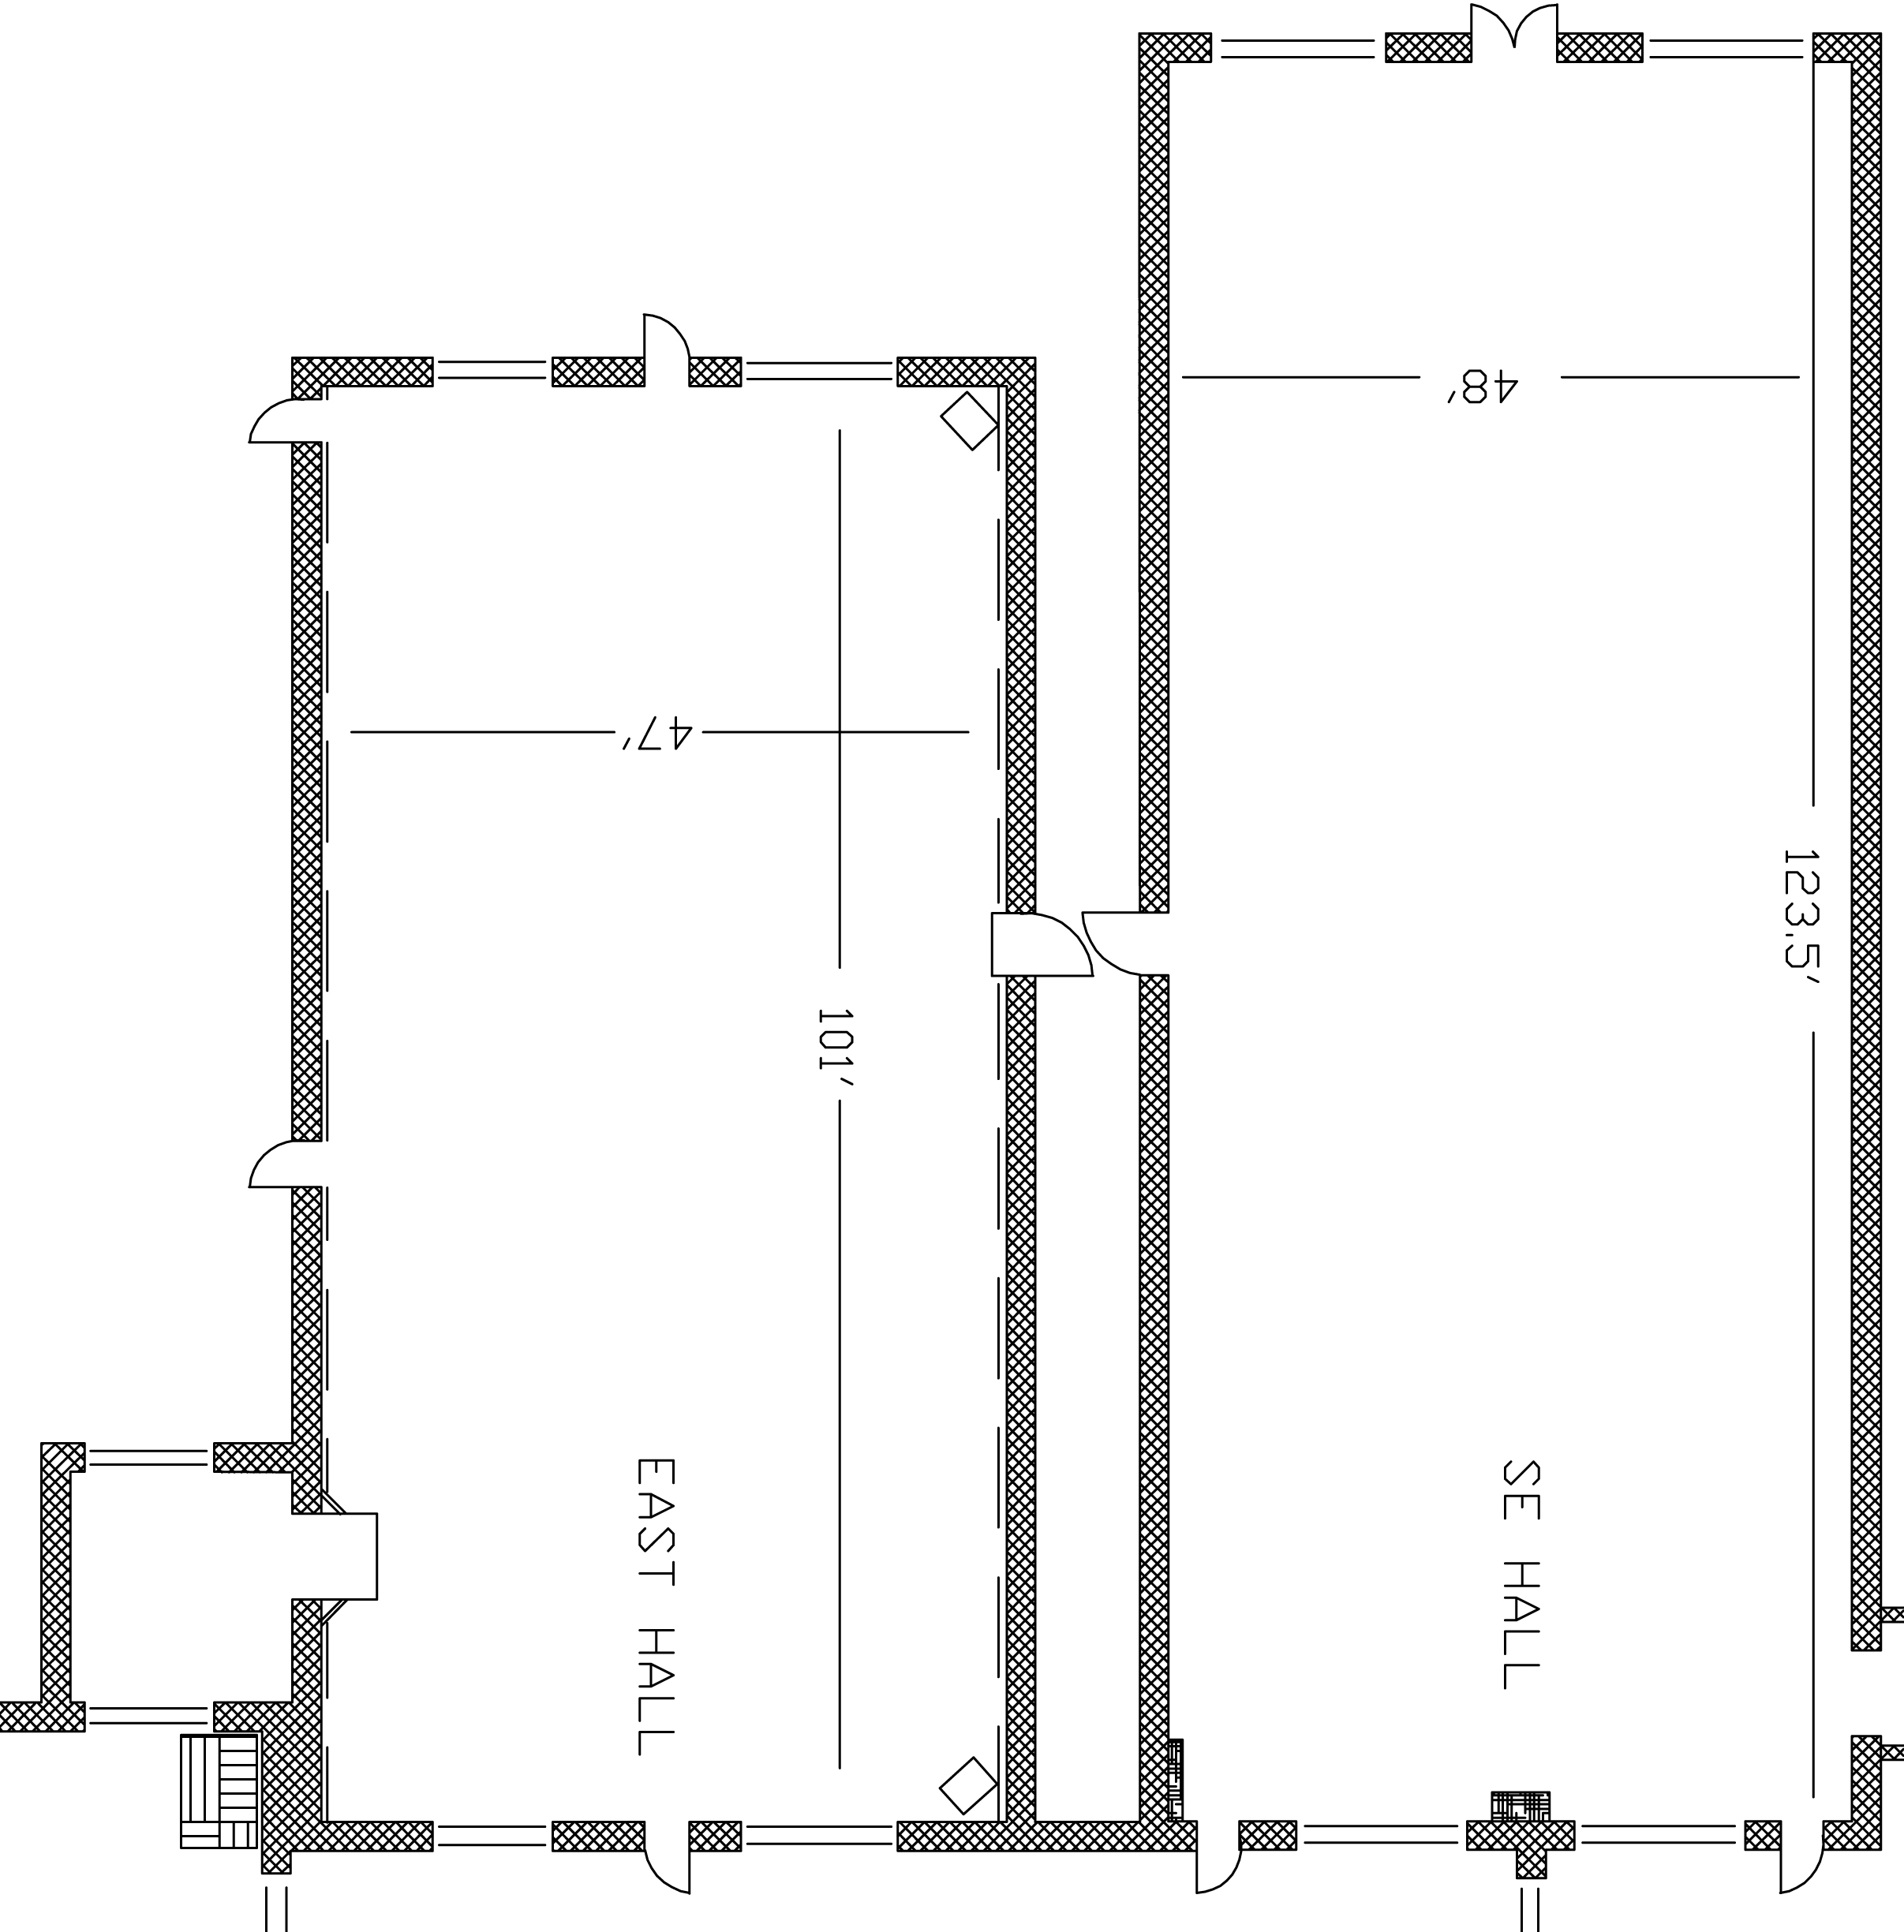 East and Southeast Hall - Floor Plan